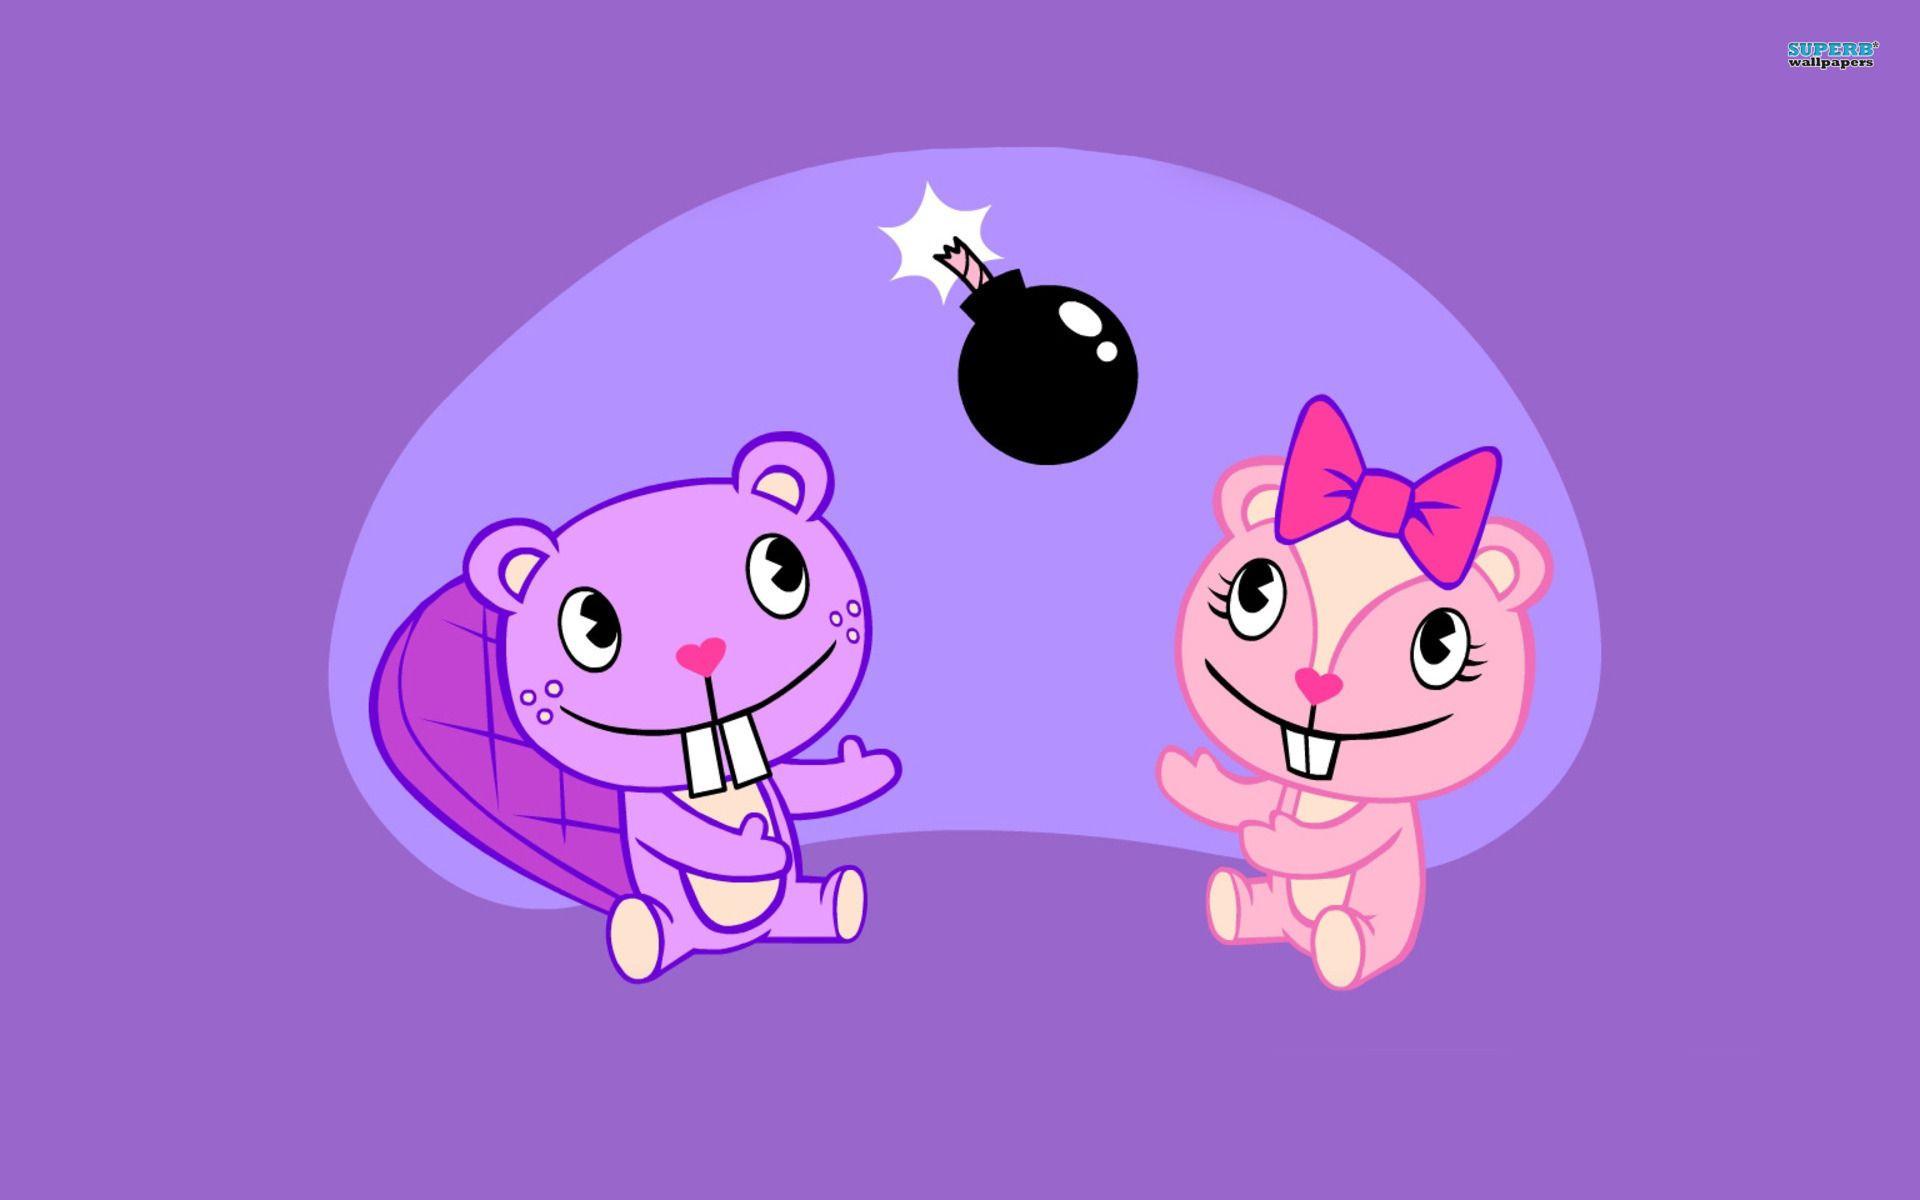 Happy Tree Friends Wallpapers - Wallpaper Cave